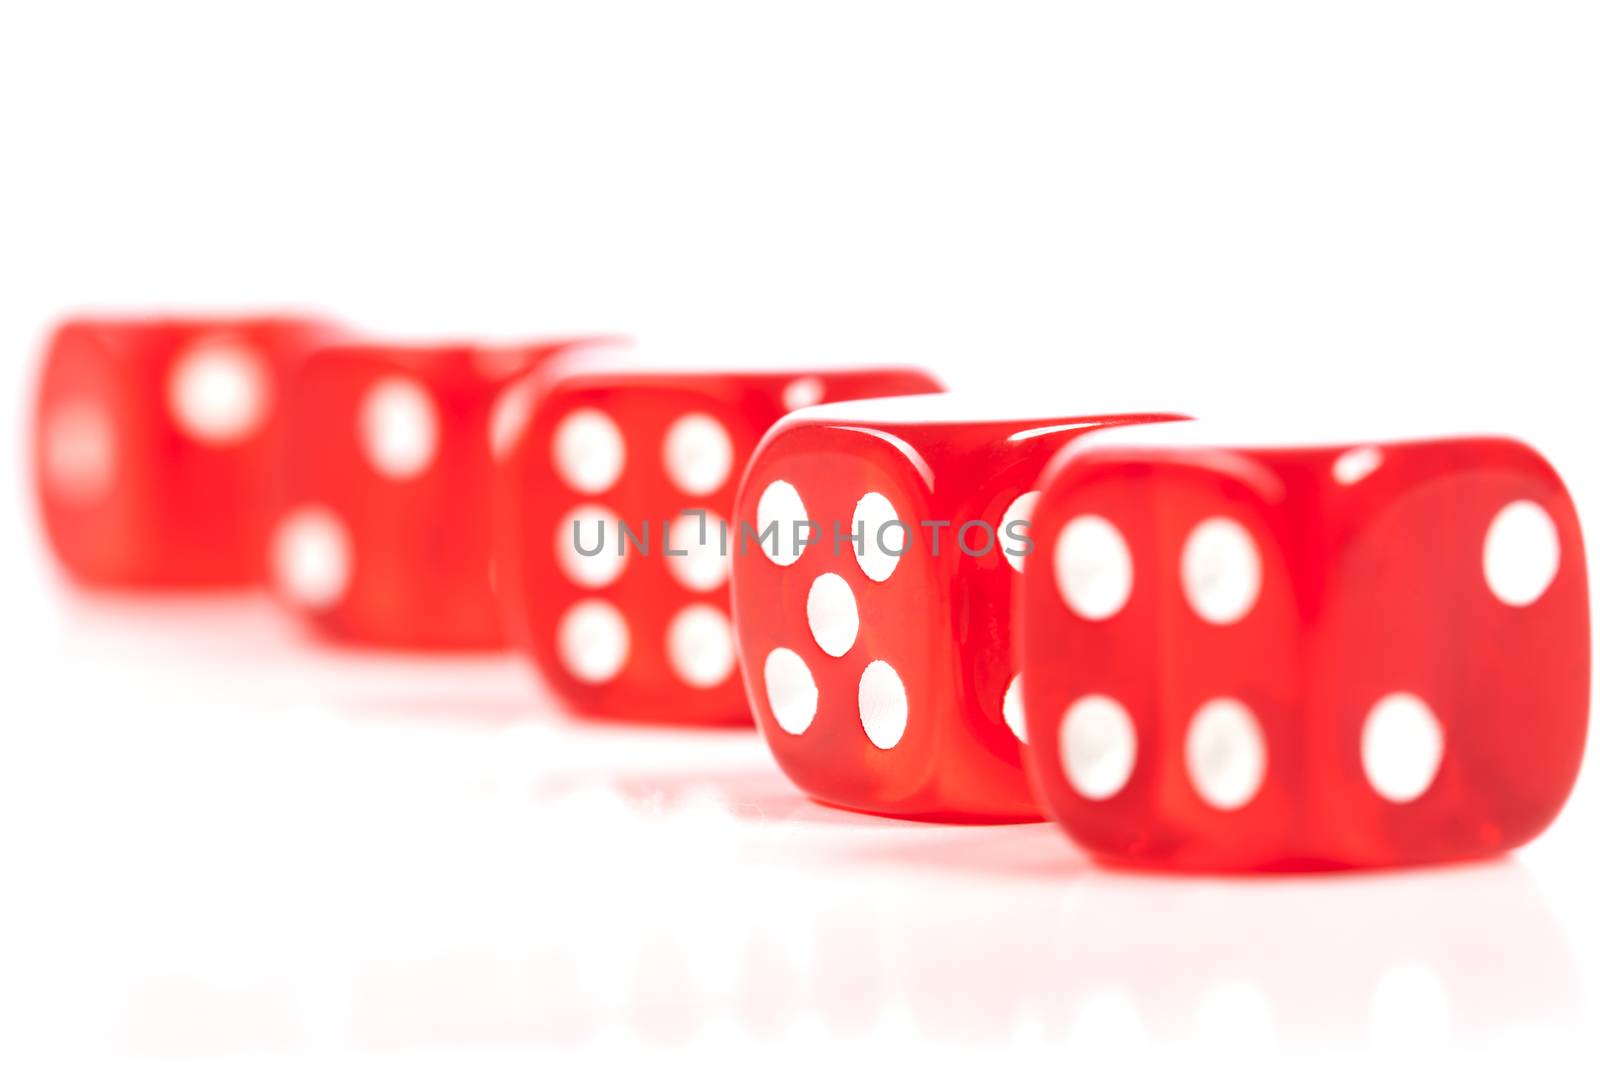 Red Casino Dice Row Focus on Five Isolated on White Bckground